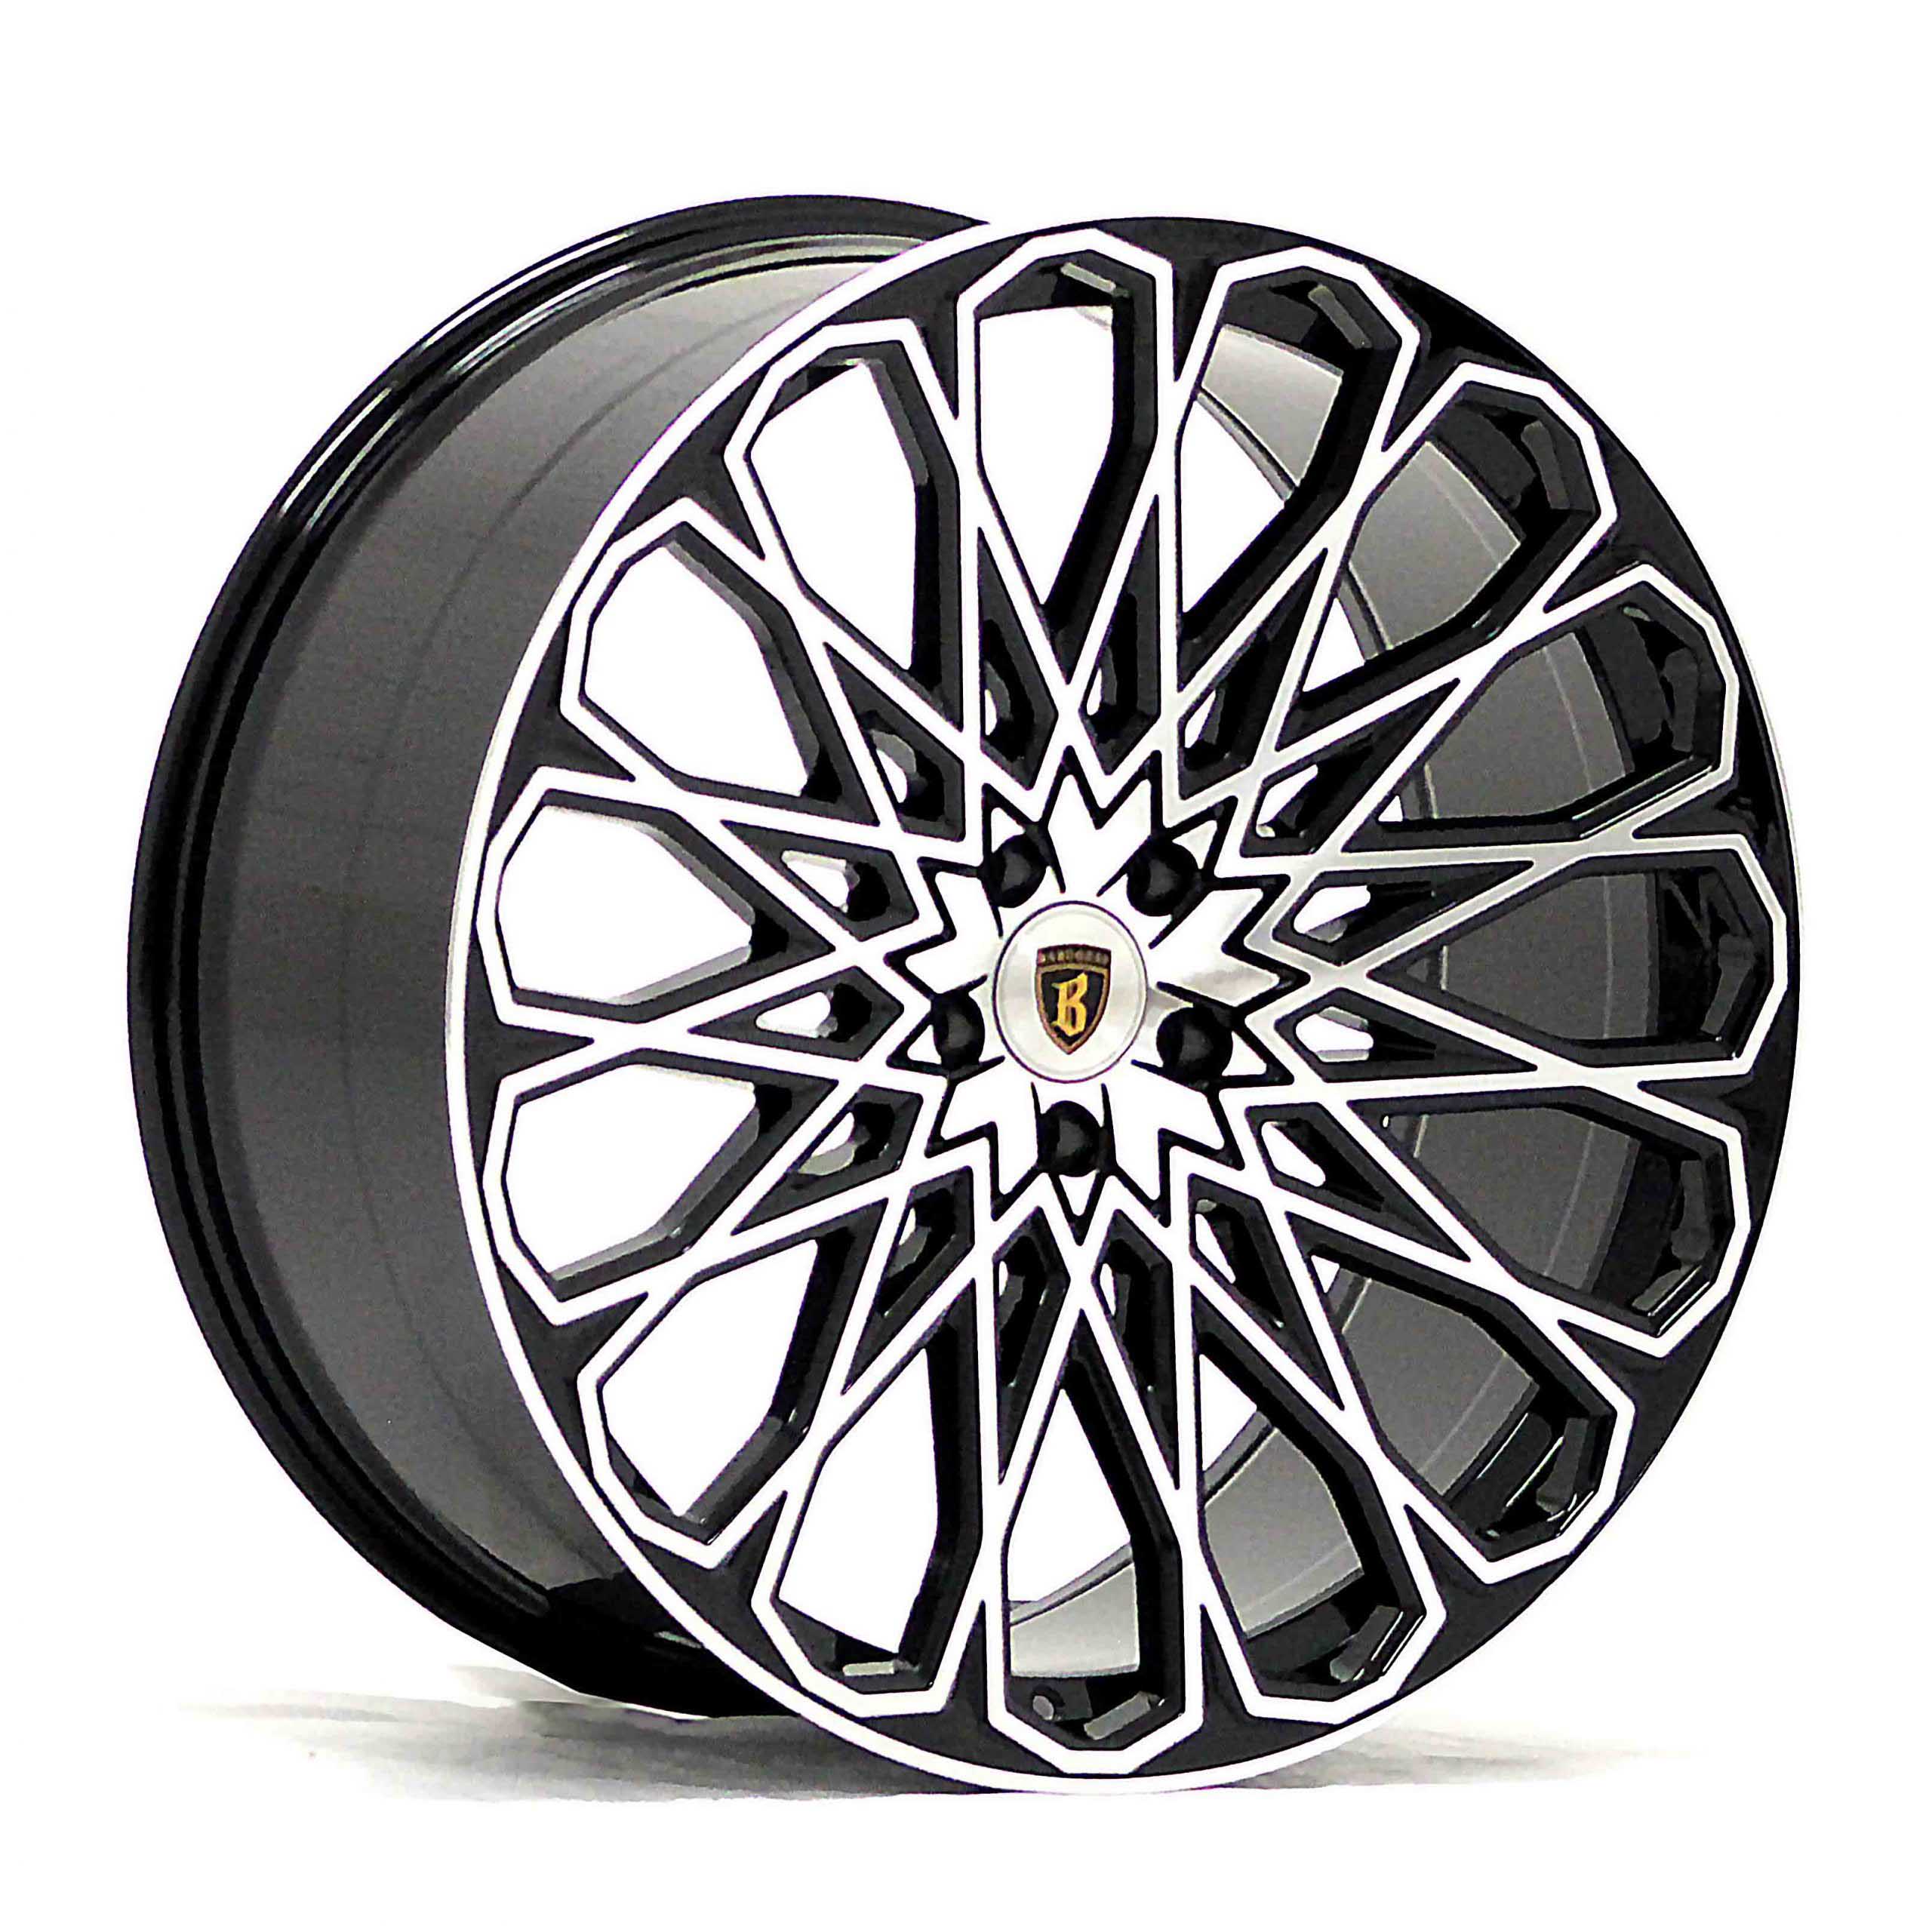 Majestic 24" Alloy wheels for Land Rover Range Rover 